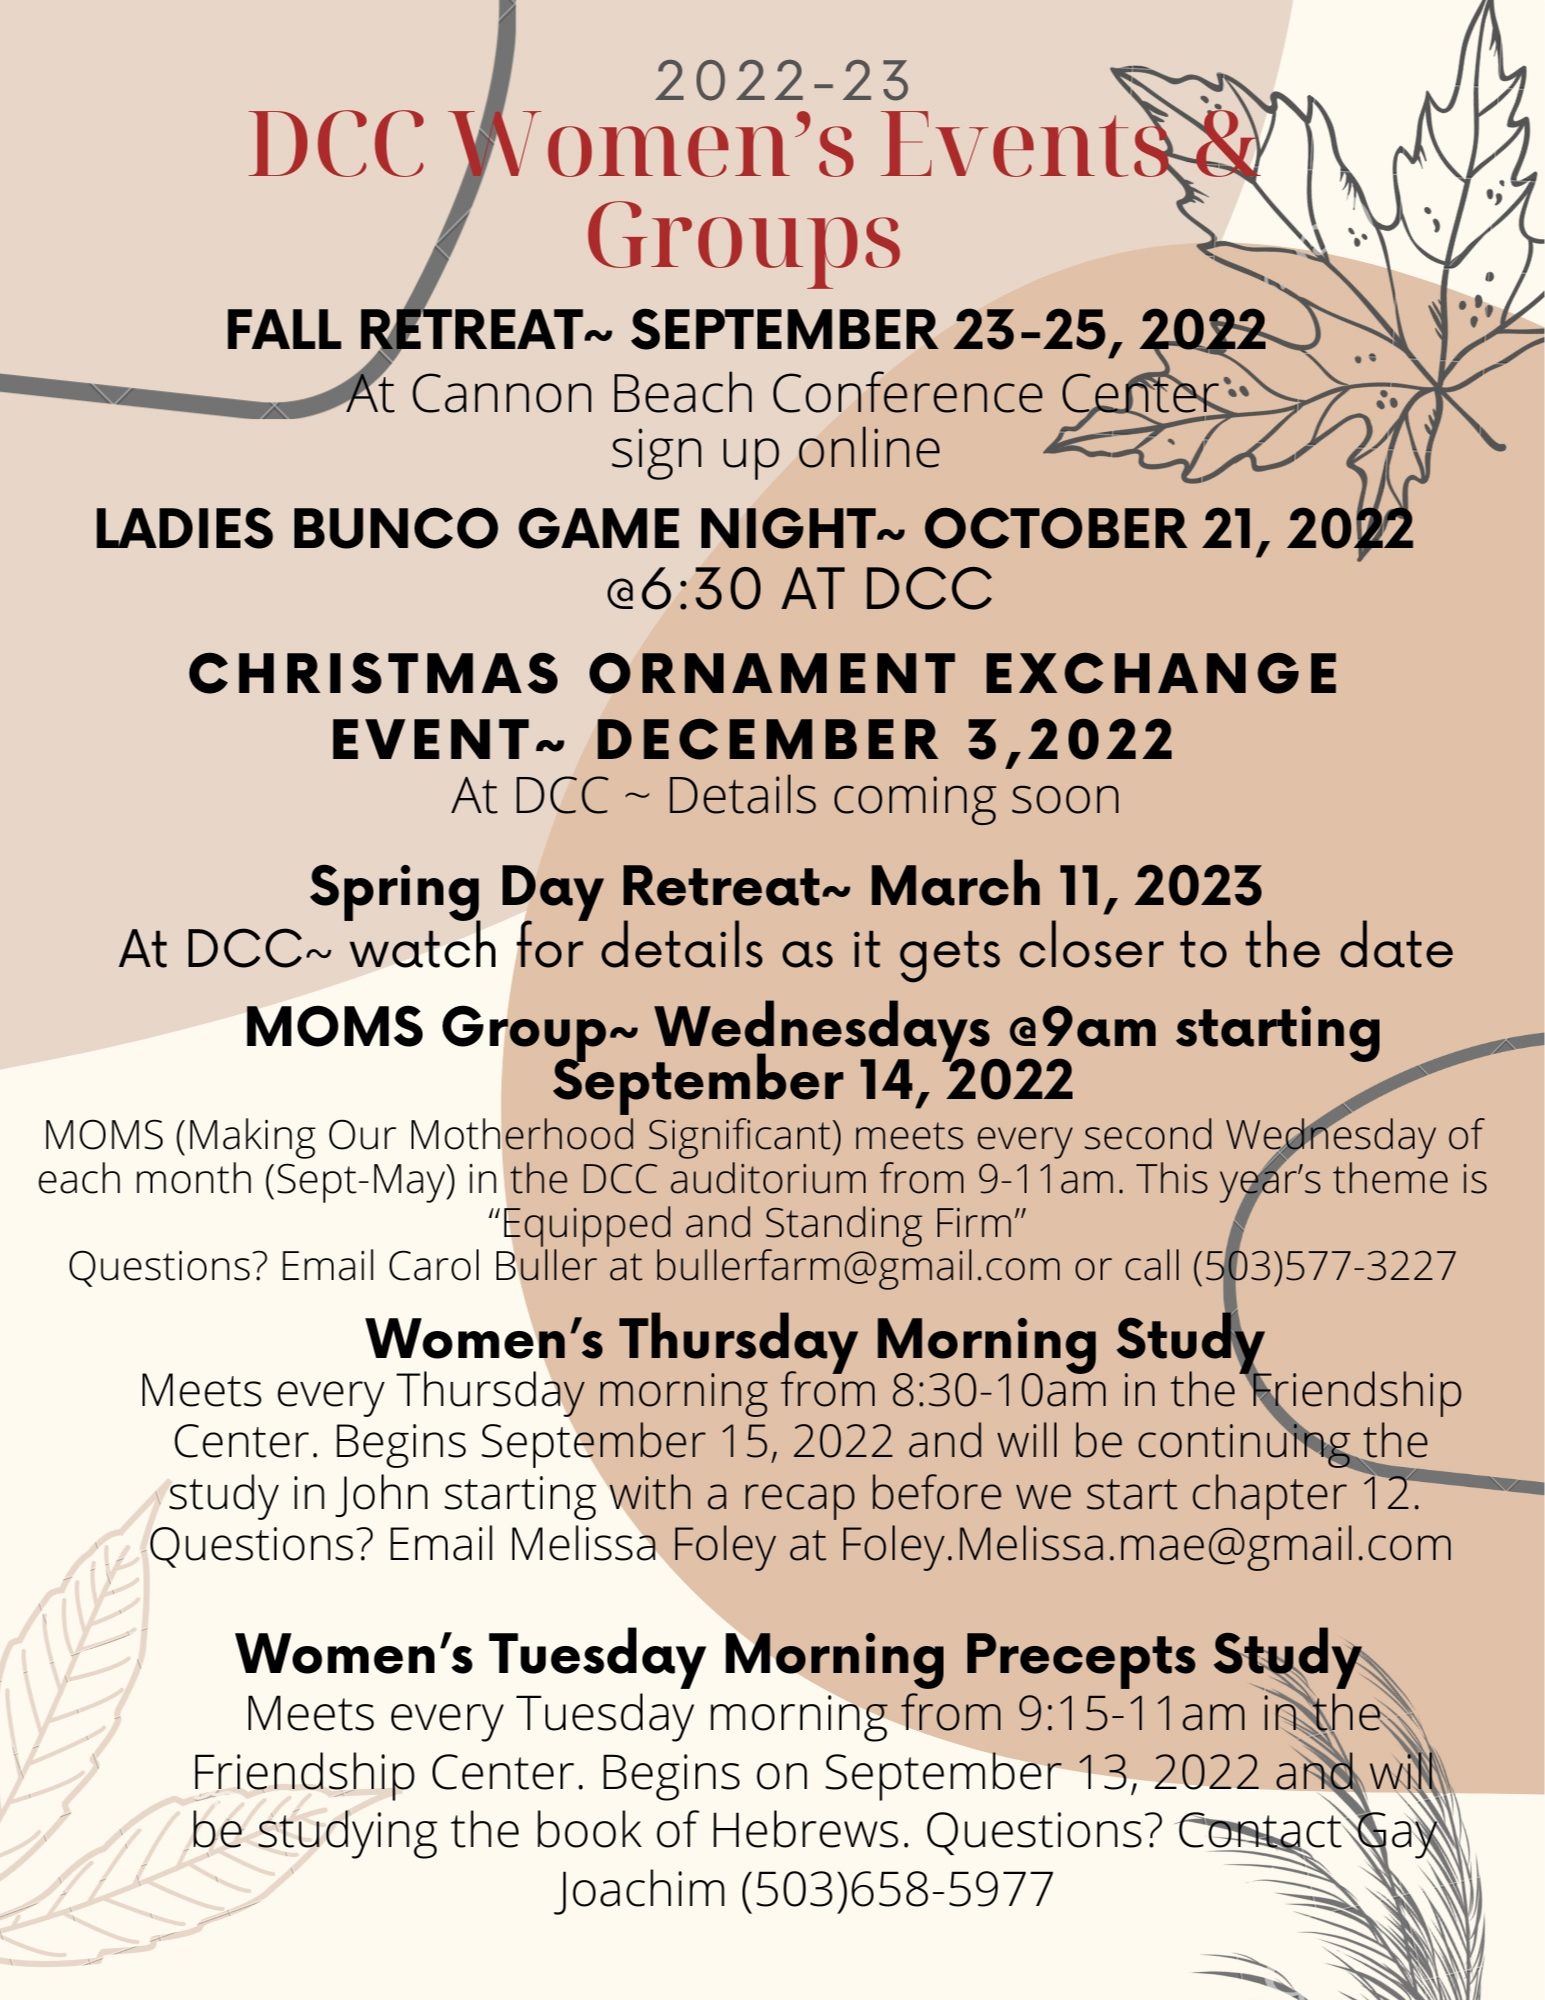 women's ministry events calendar for fall 2022 through spring 2023